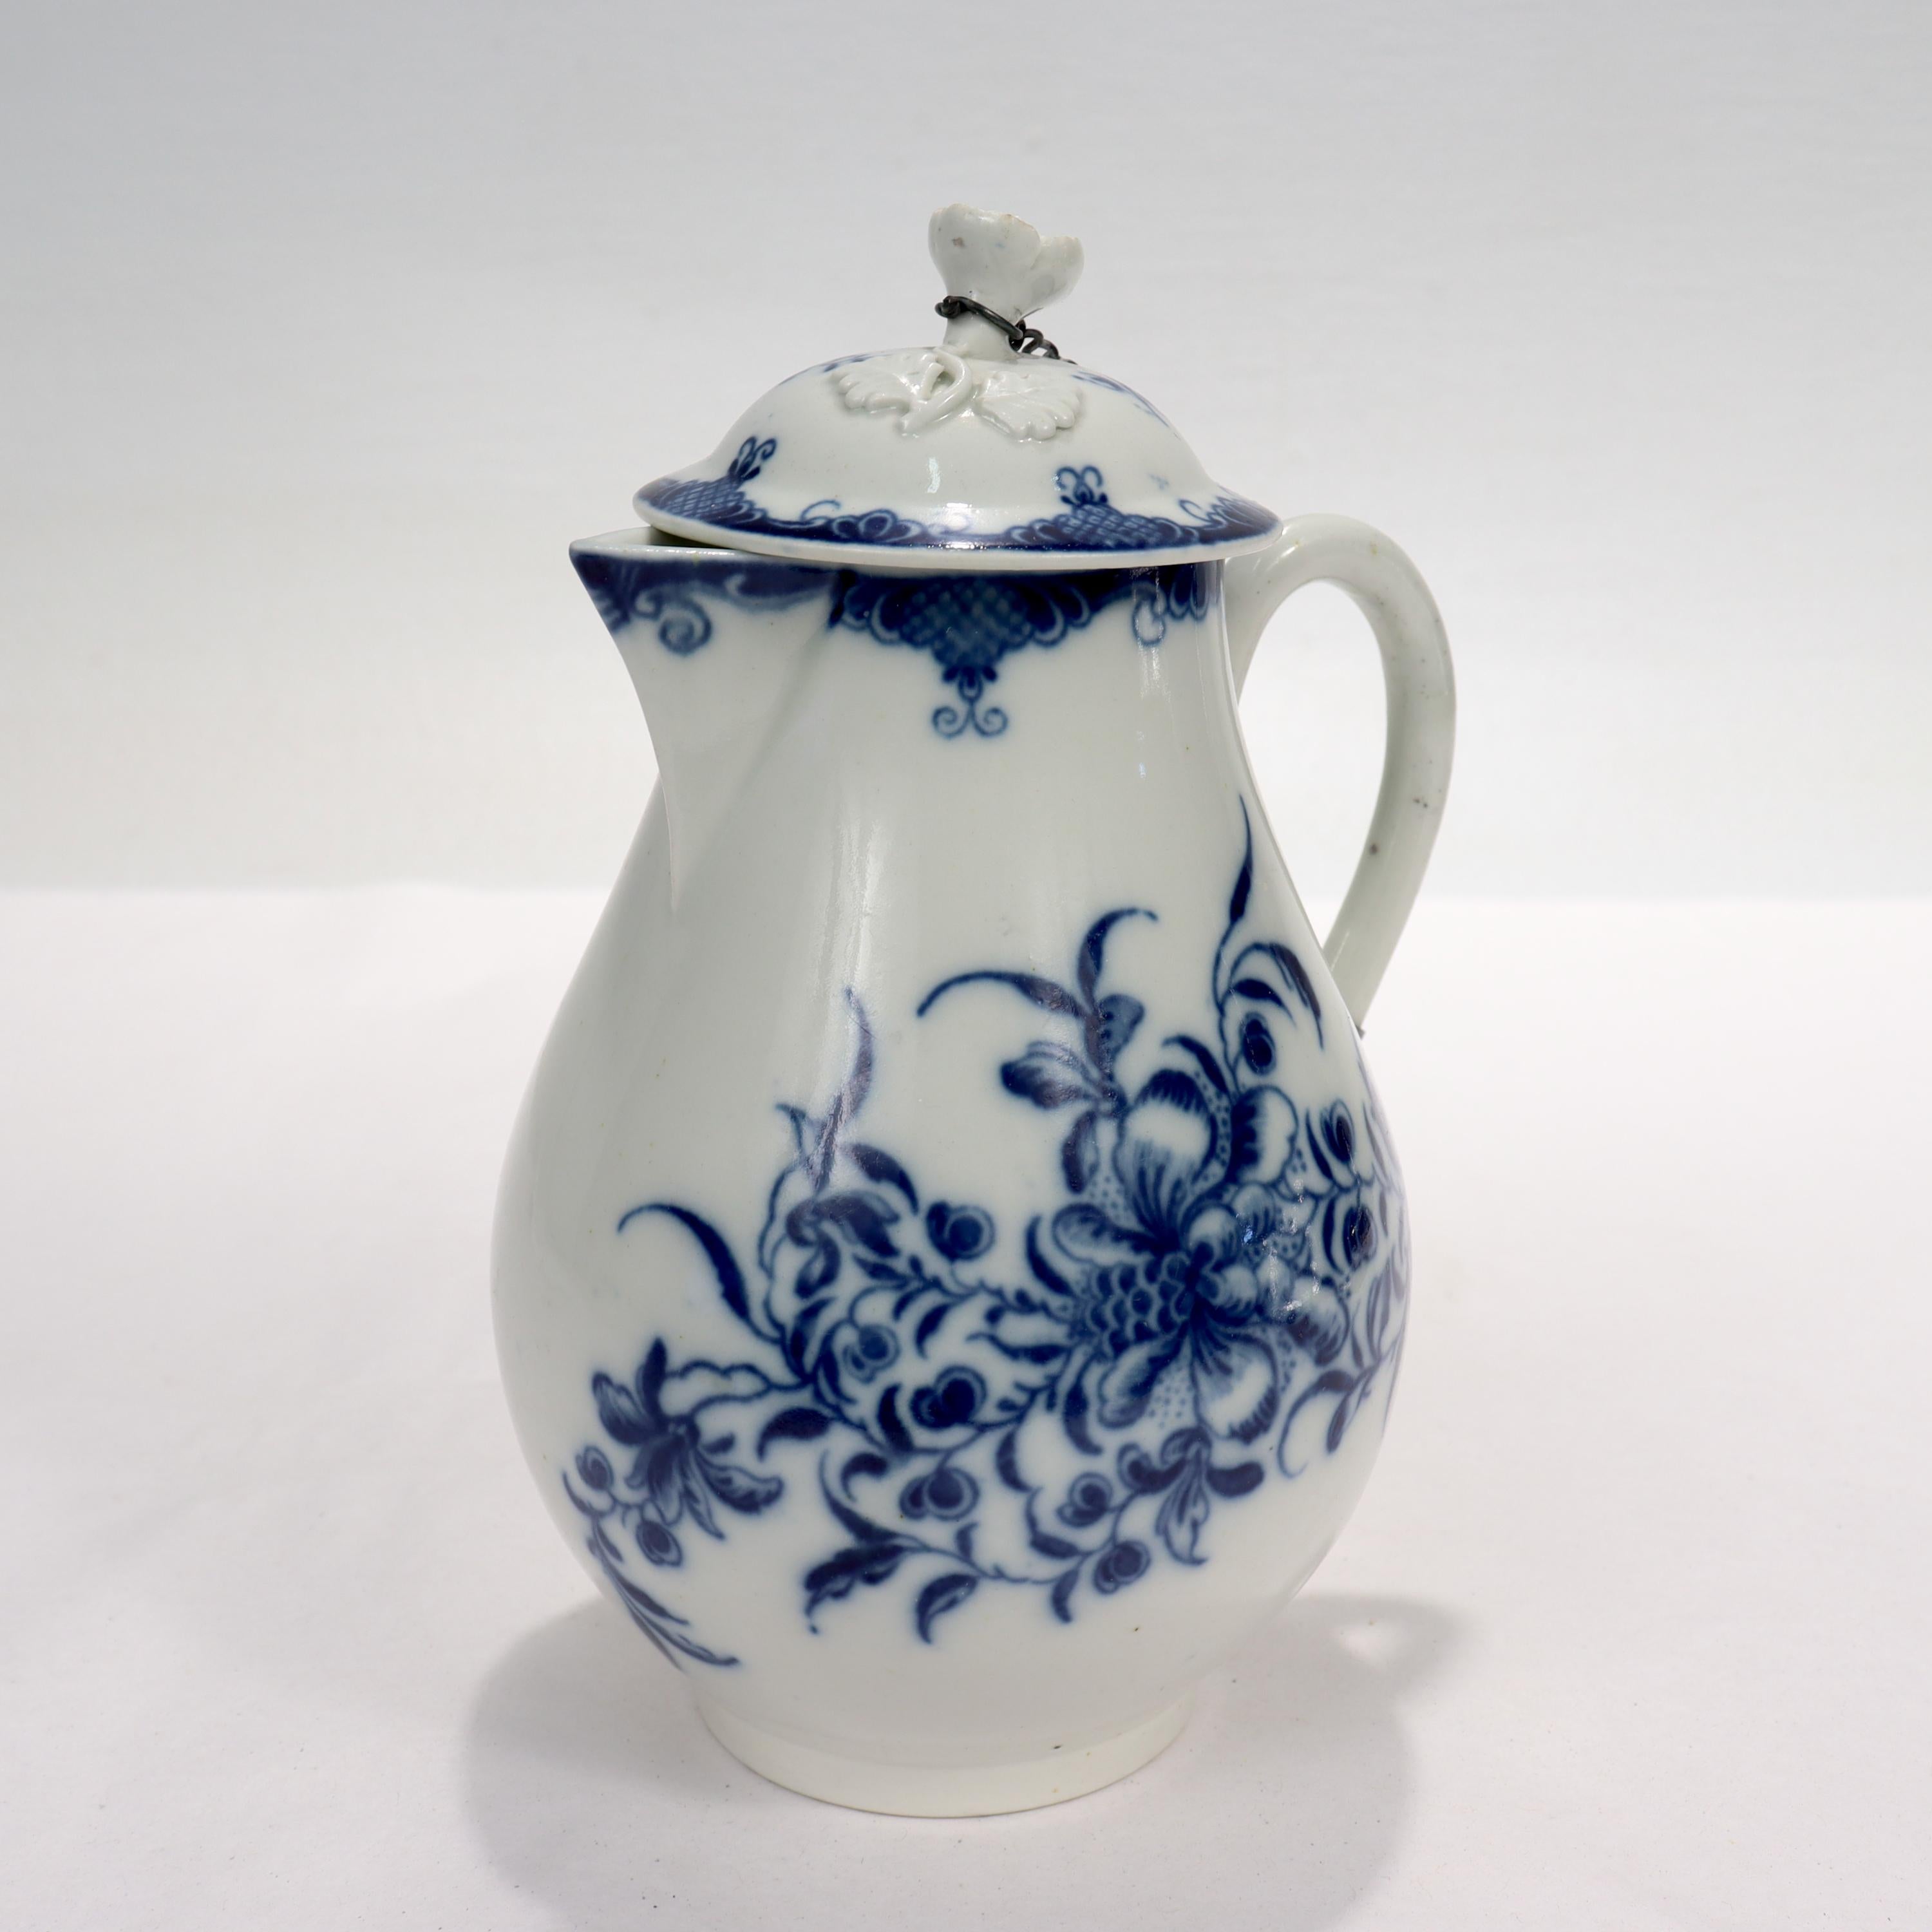 A fine antique English porcelain milk pitcher or jug.

Comprising the pot, a conforming lid, and a later associated chain connecting the two. 

With blue underglaze decoration of floral sprays and a three dimensional flower finial to the